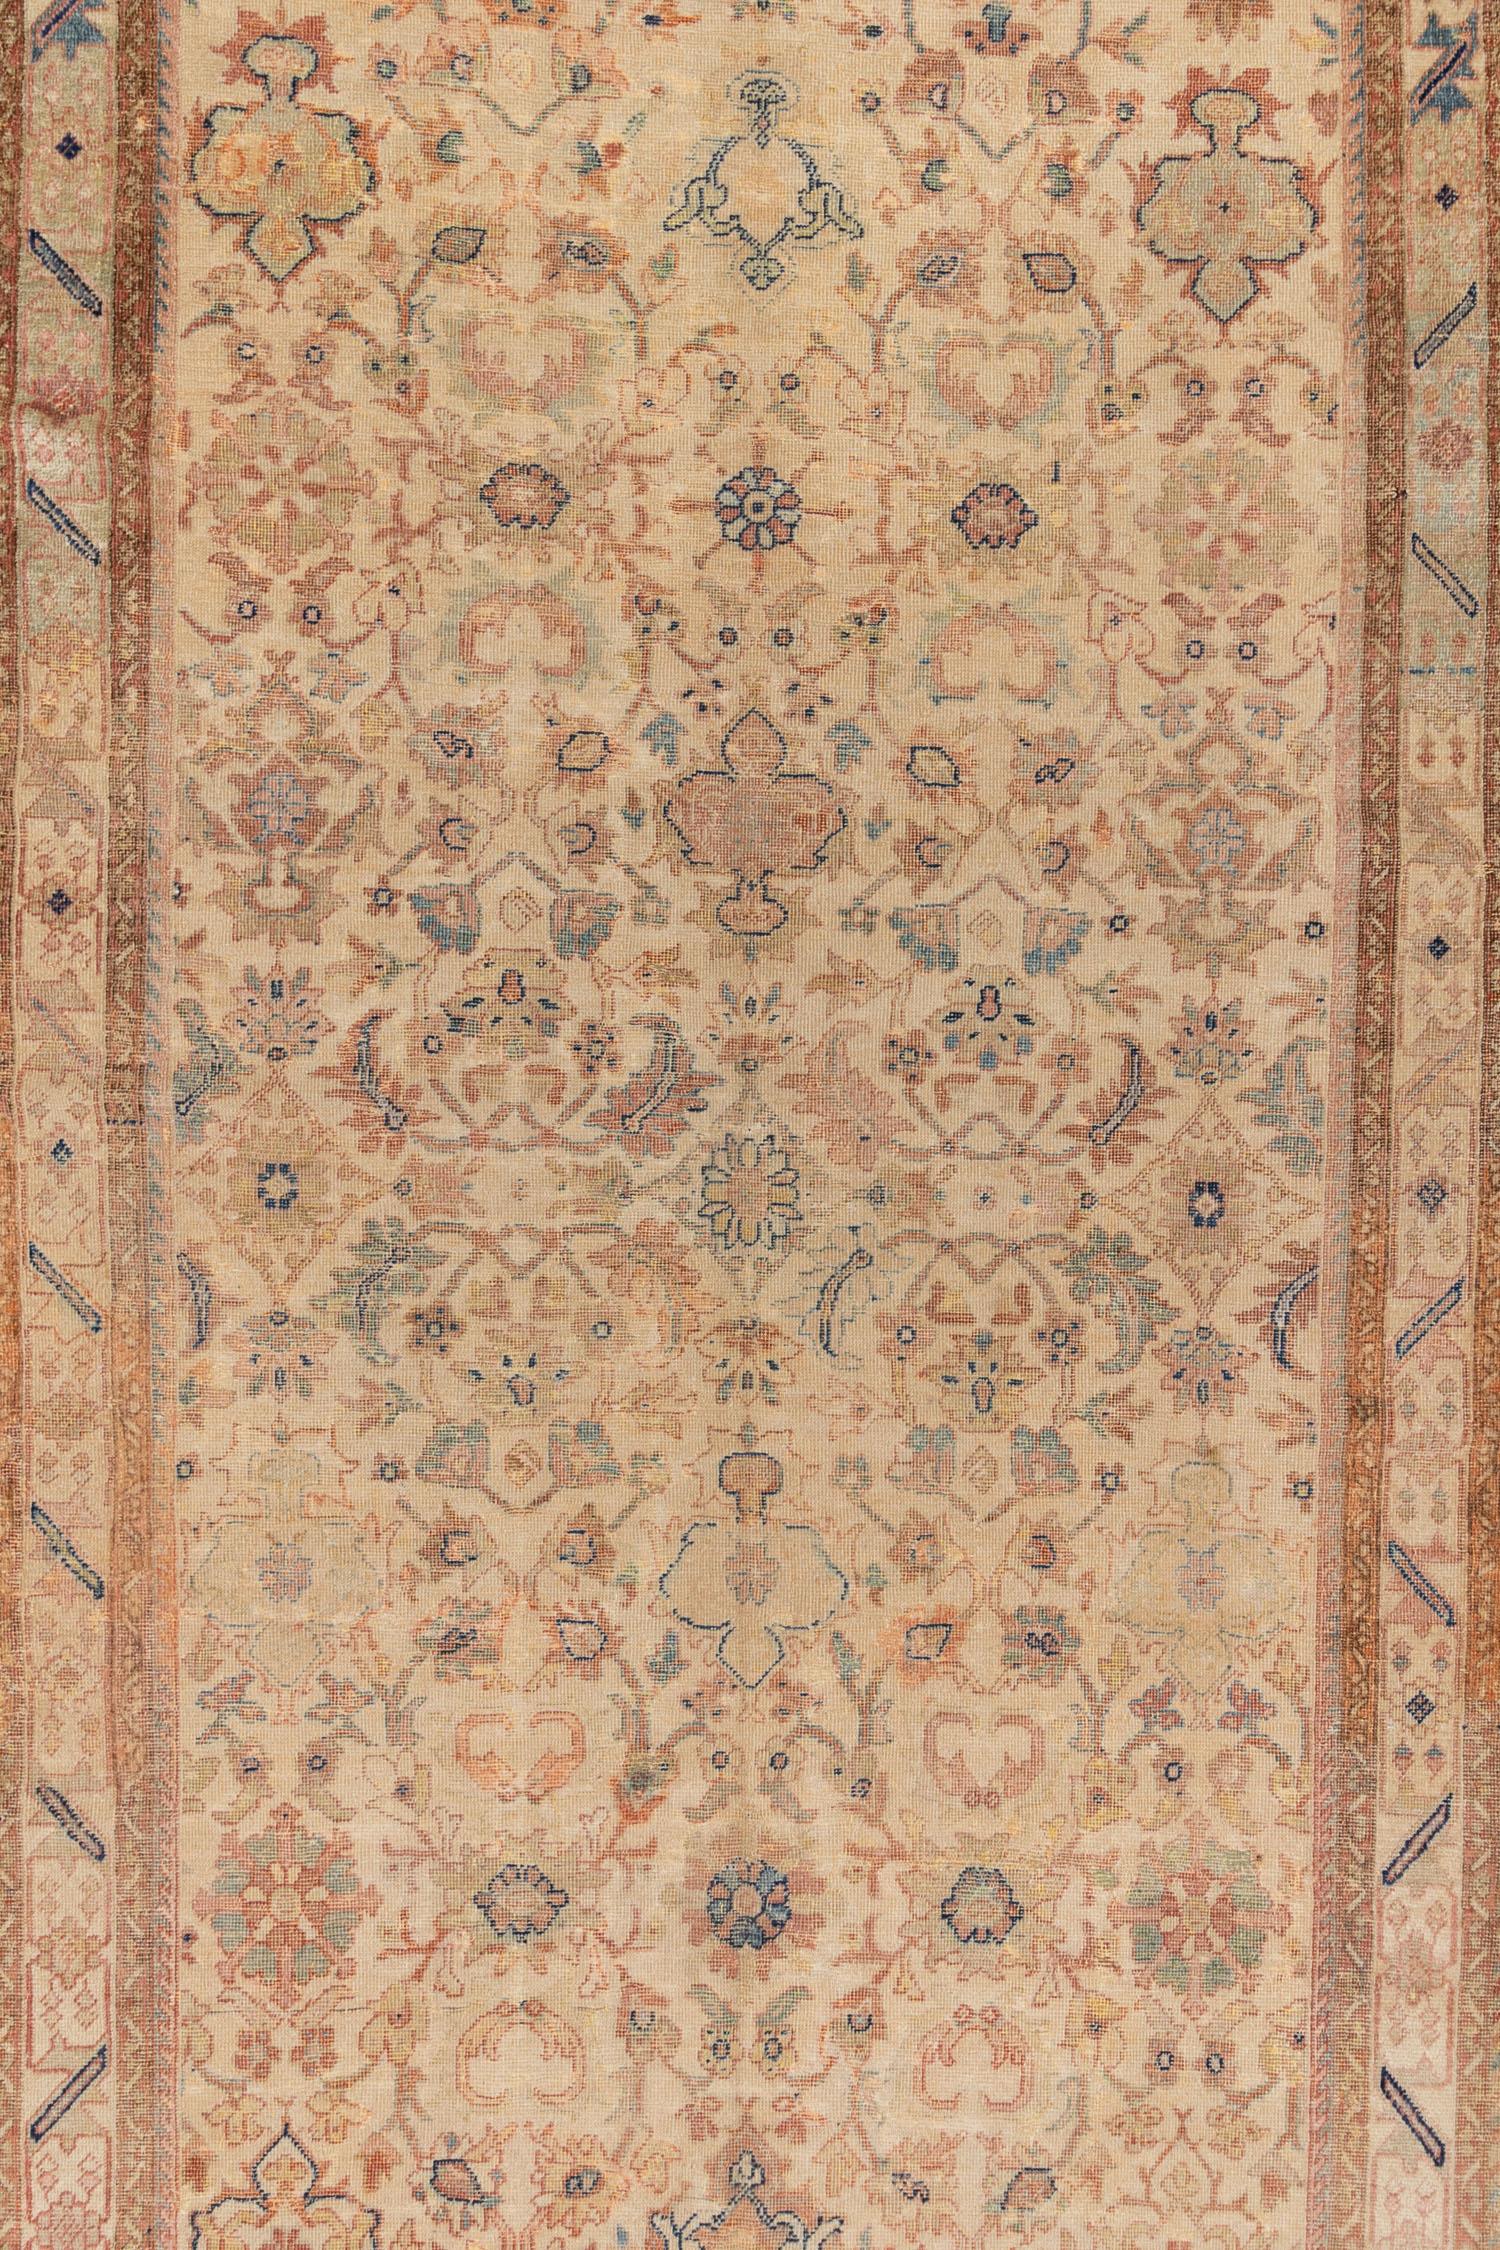 Beautiful Vintage Persian Mahal Rug in neutral warm tones with some rust and blue details. good size and great condition. 